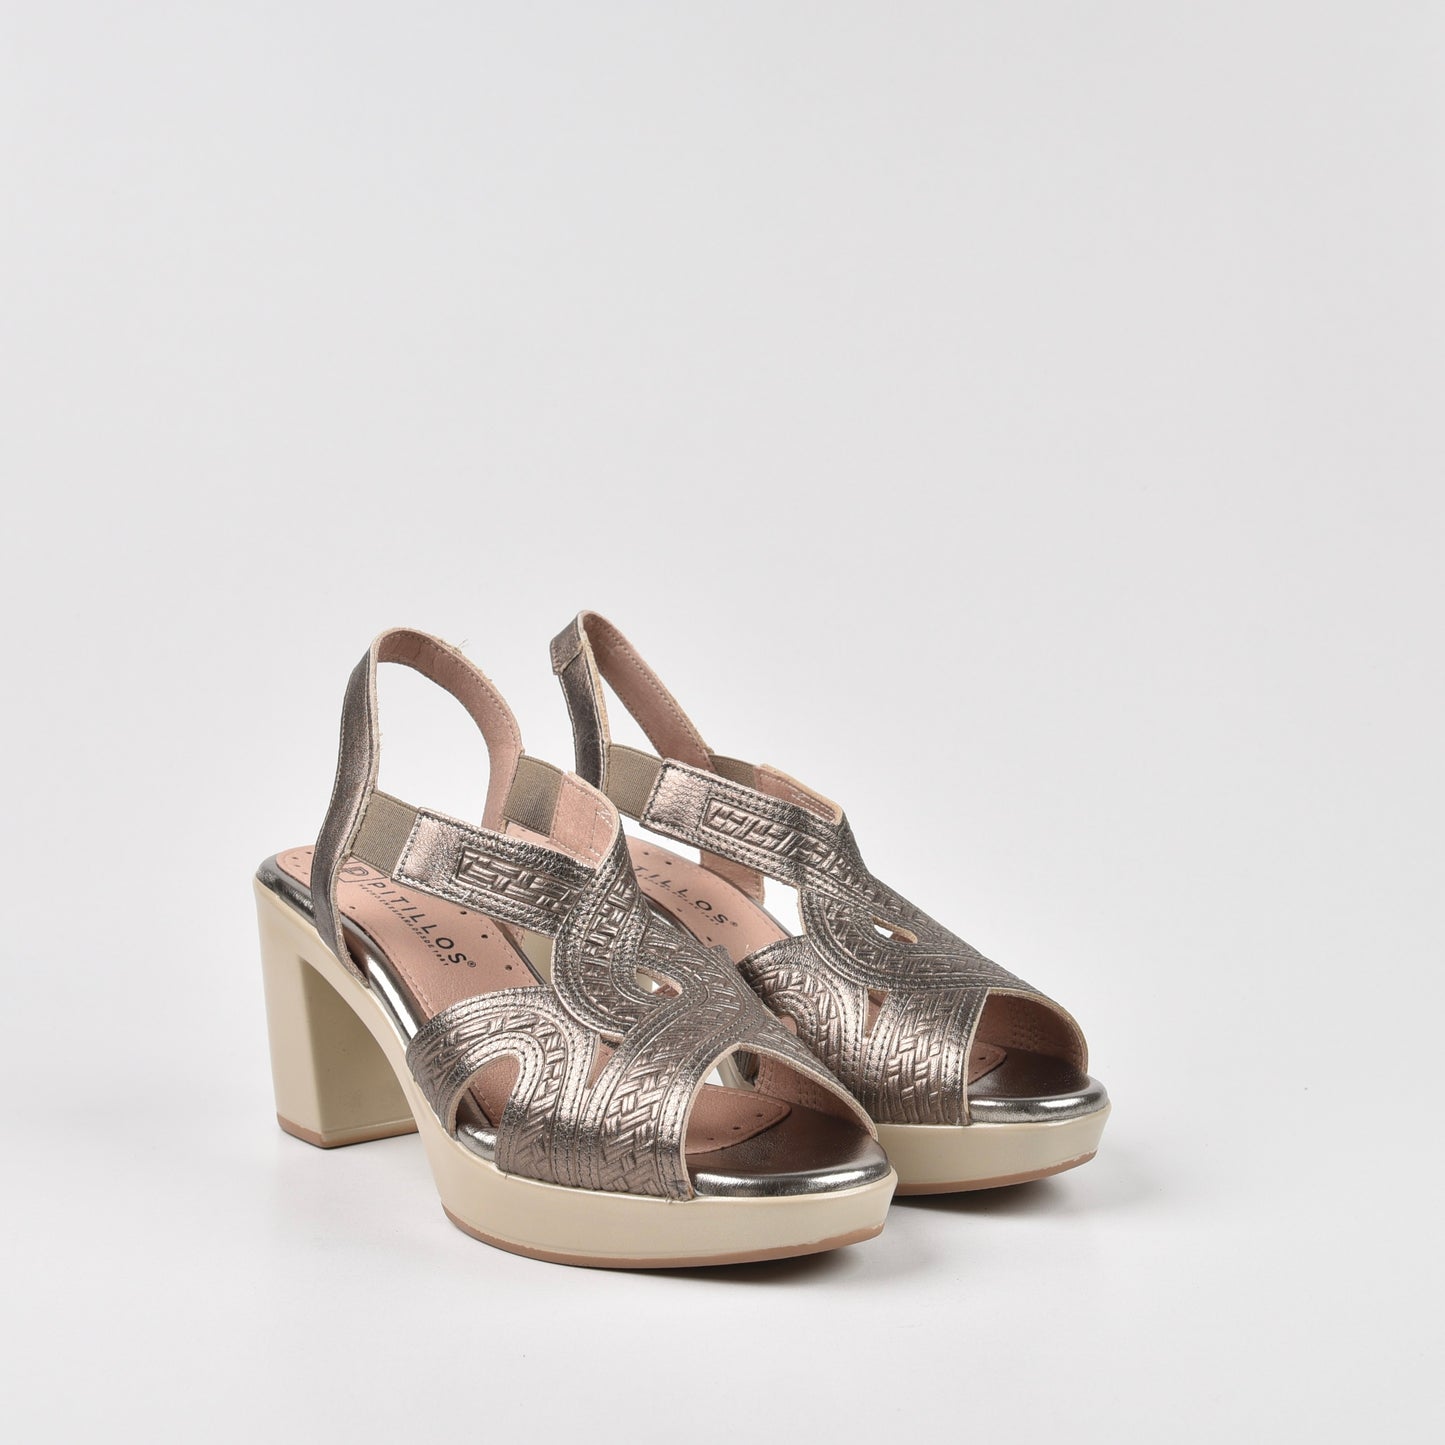 Pitillos Spanish Classic High Heel Sandal for Women in Bronce.